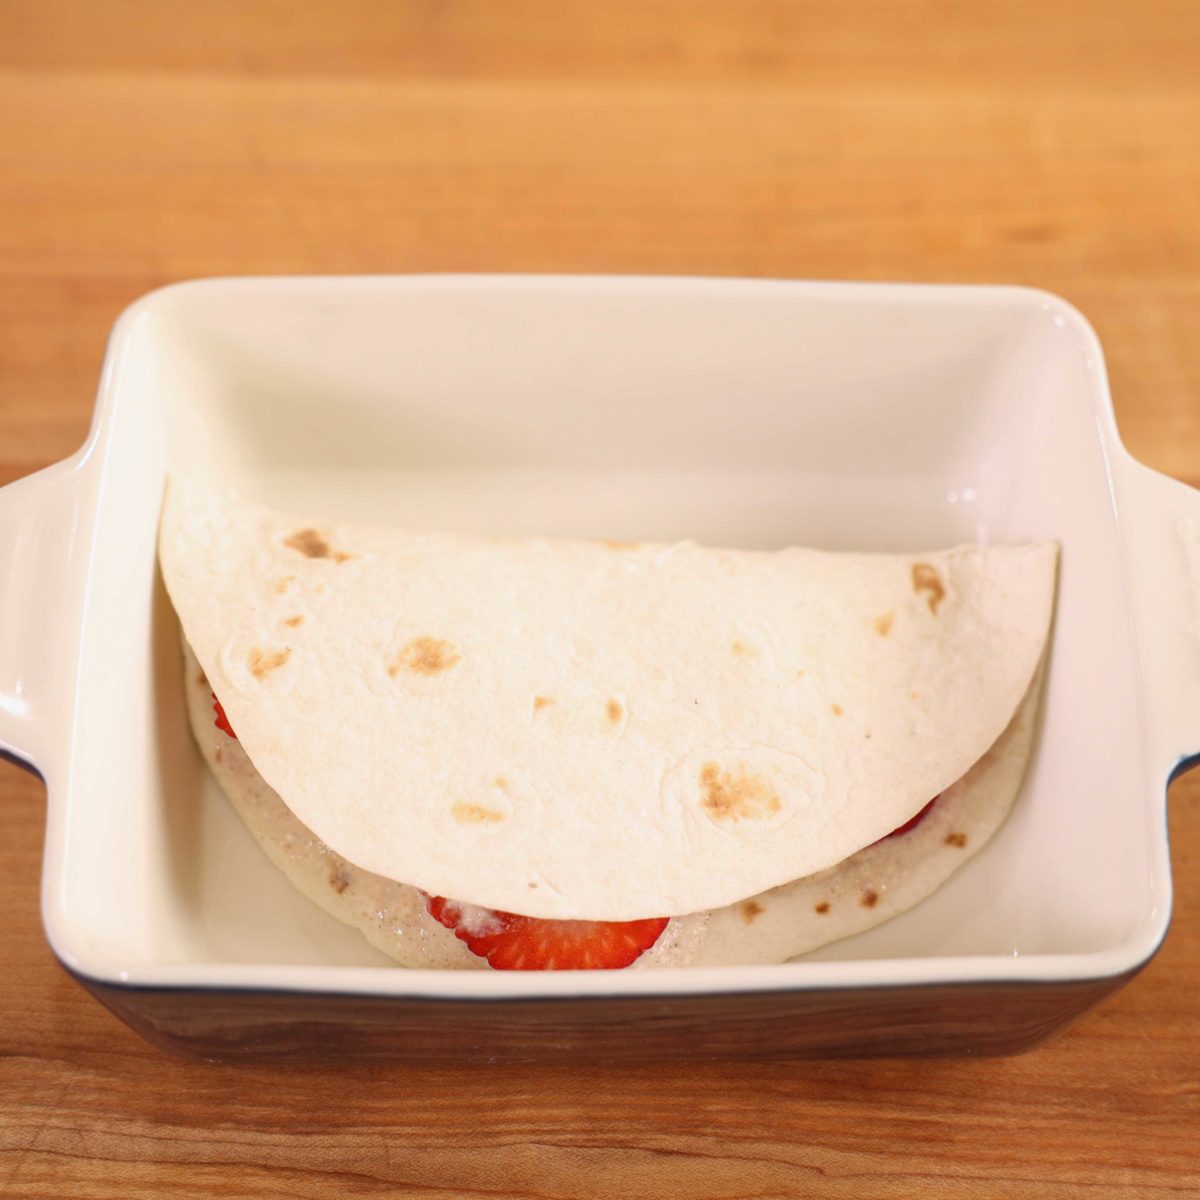 a tortilla filled with fruit folded over in a baking dish.